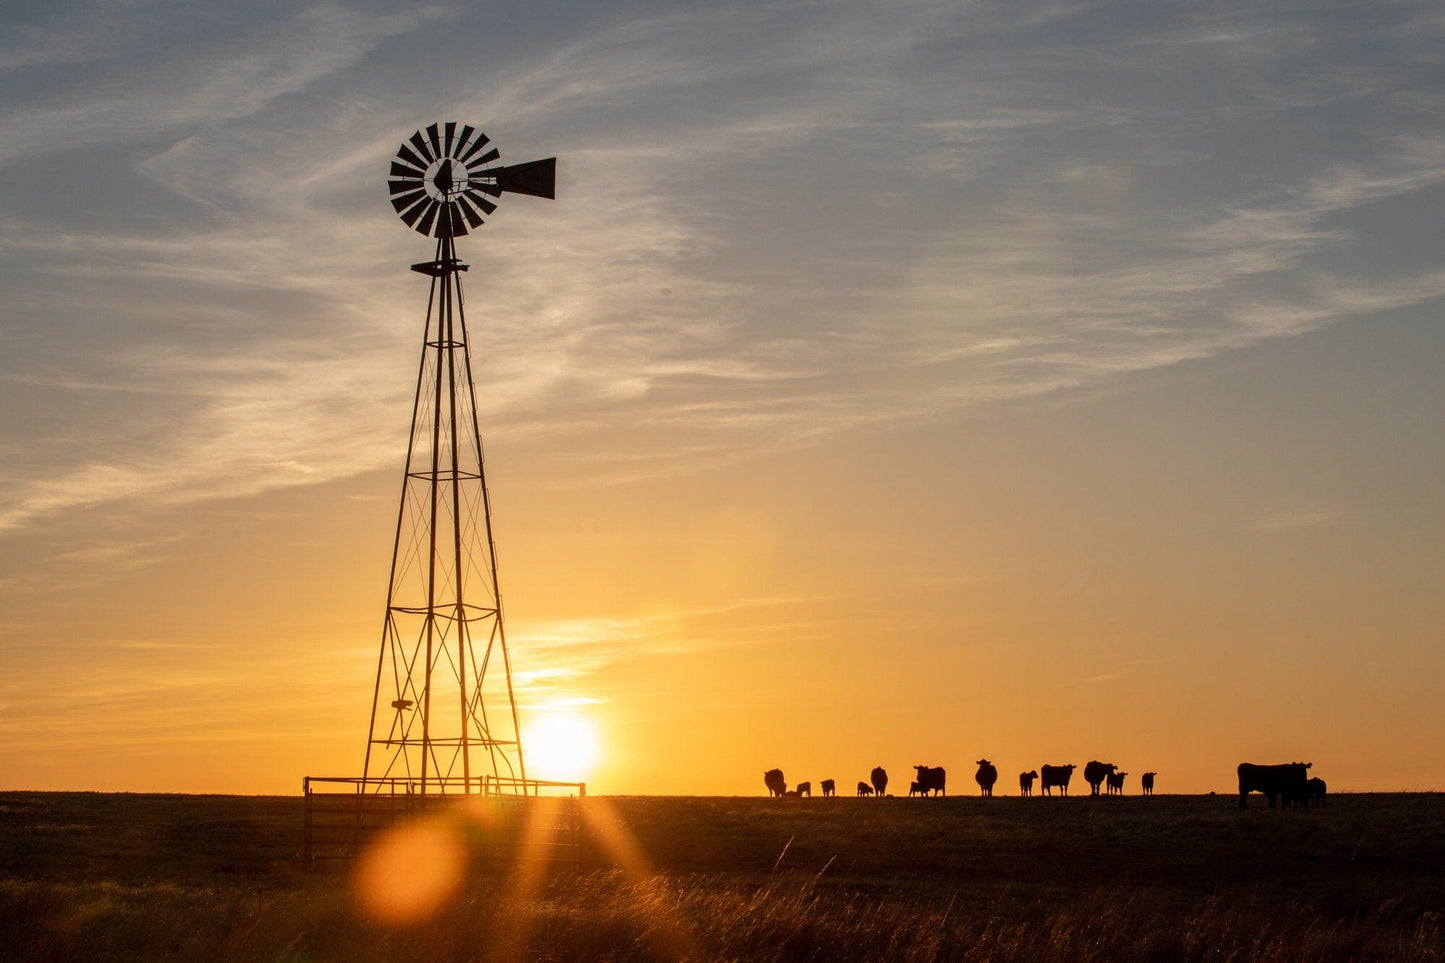 Old Windmill at Sunset with Angus Cattle Paper Photo Print / 12 x 18 Inches Wall Art Teri James Photography